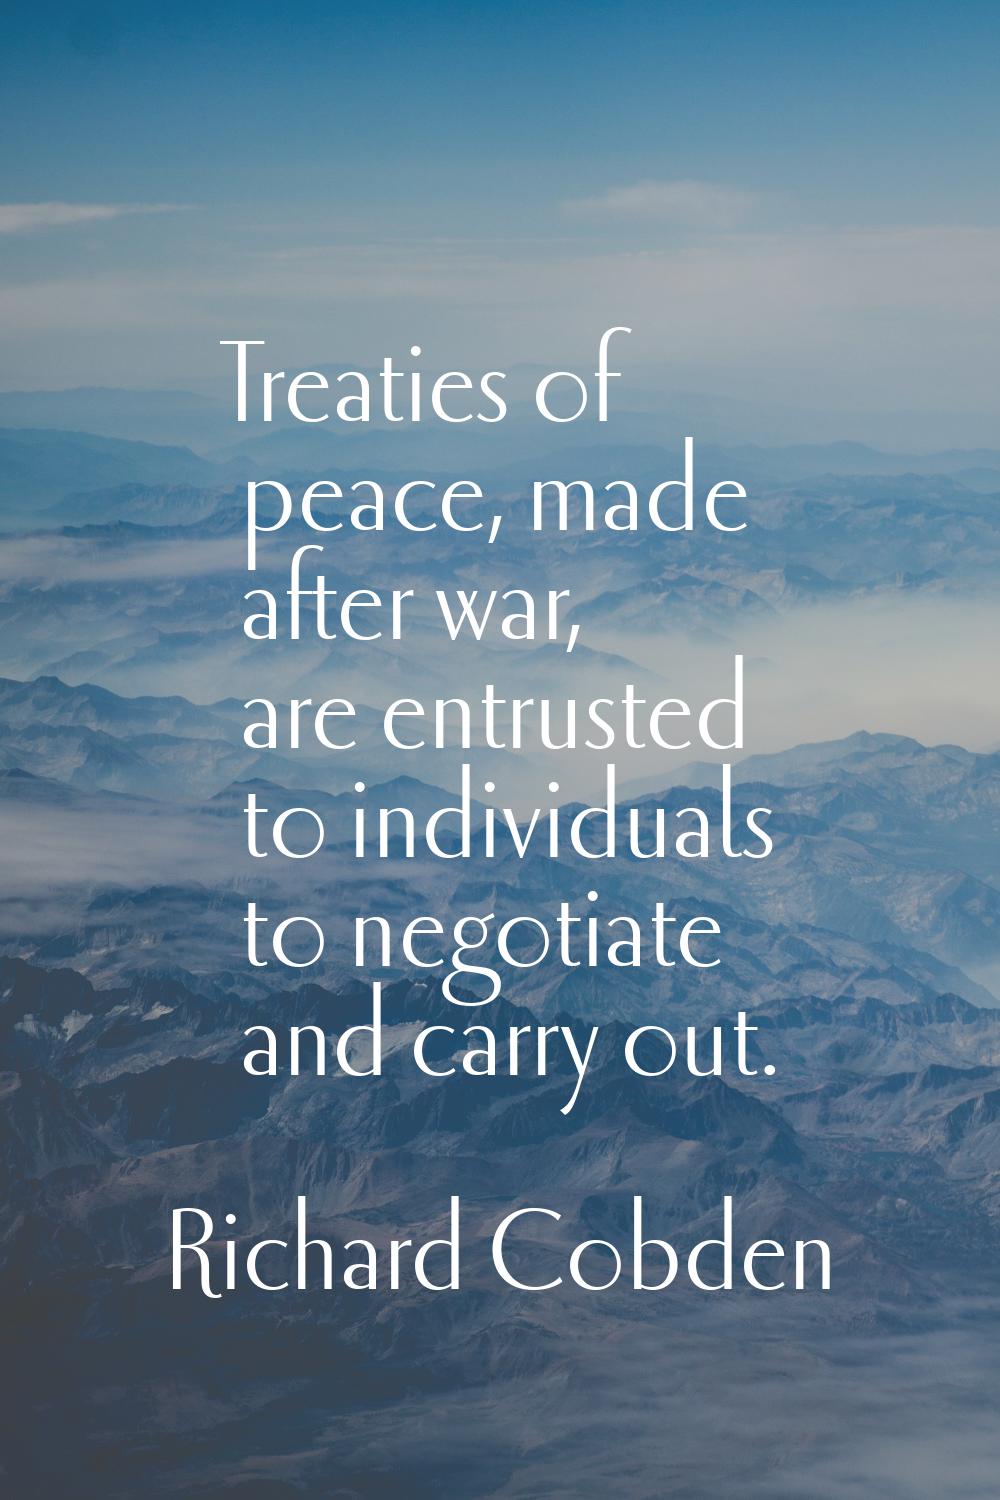 Treaties of peace, made after war, are entrusted to individuals to negotiate and carry out.